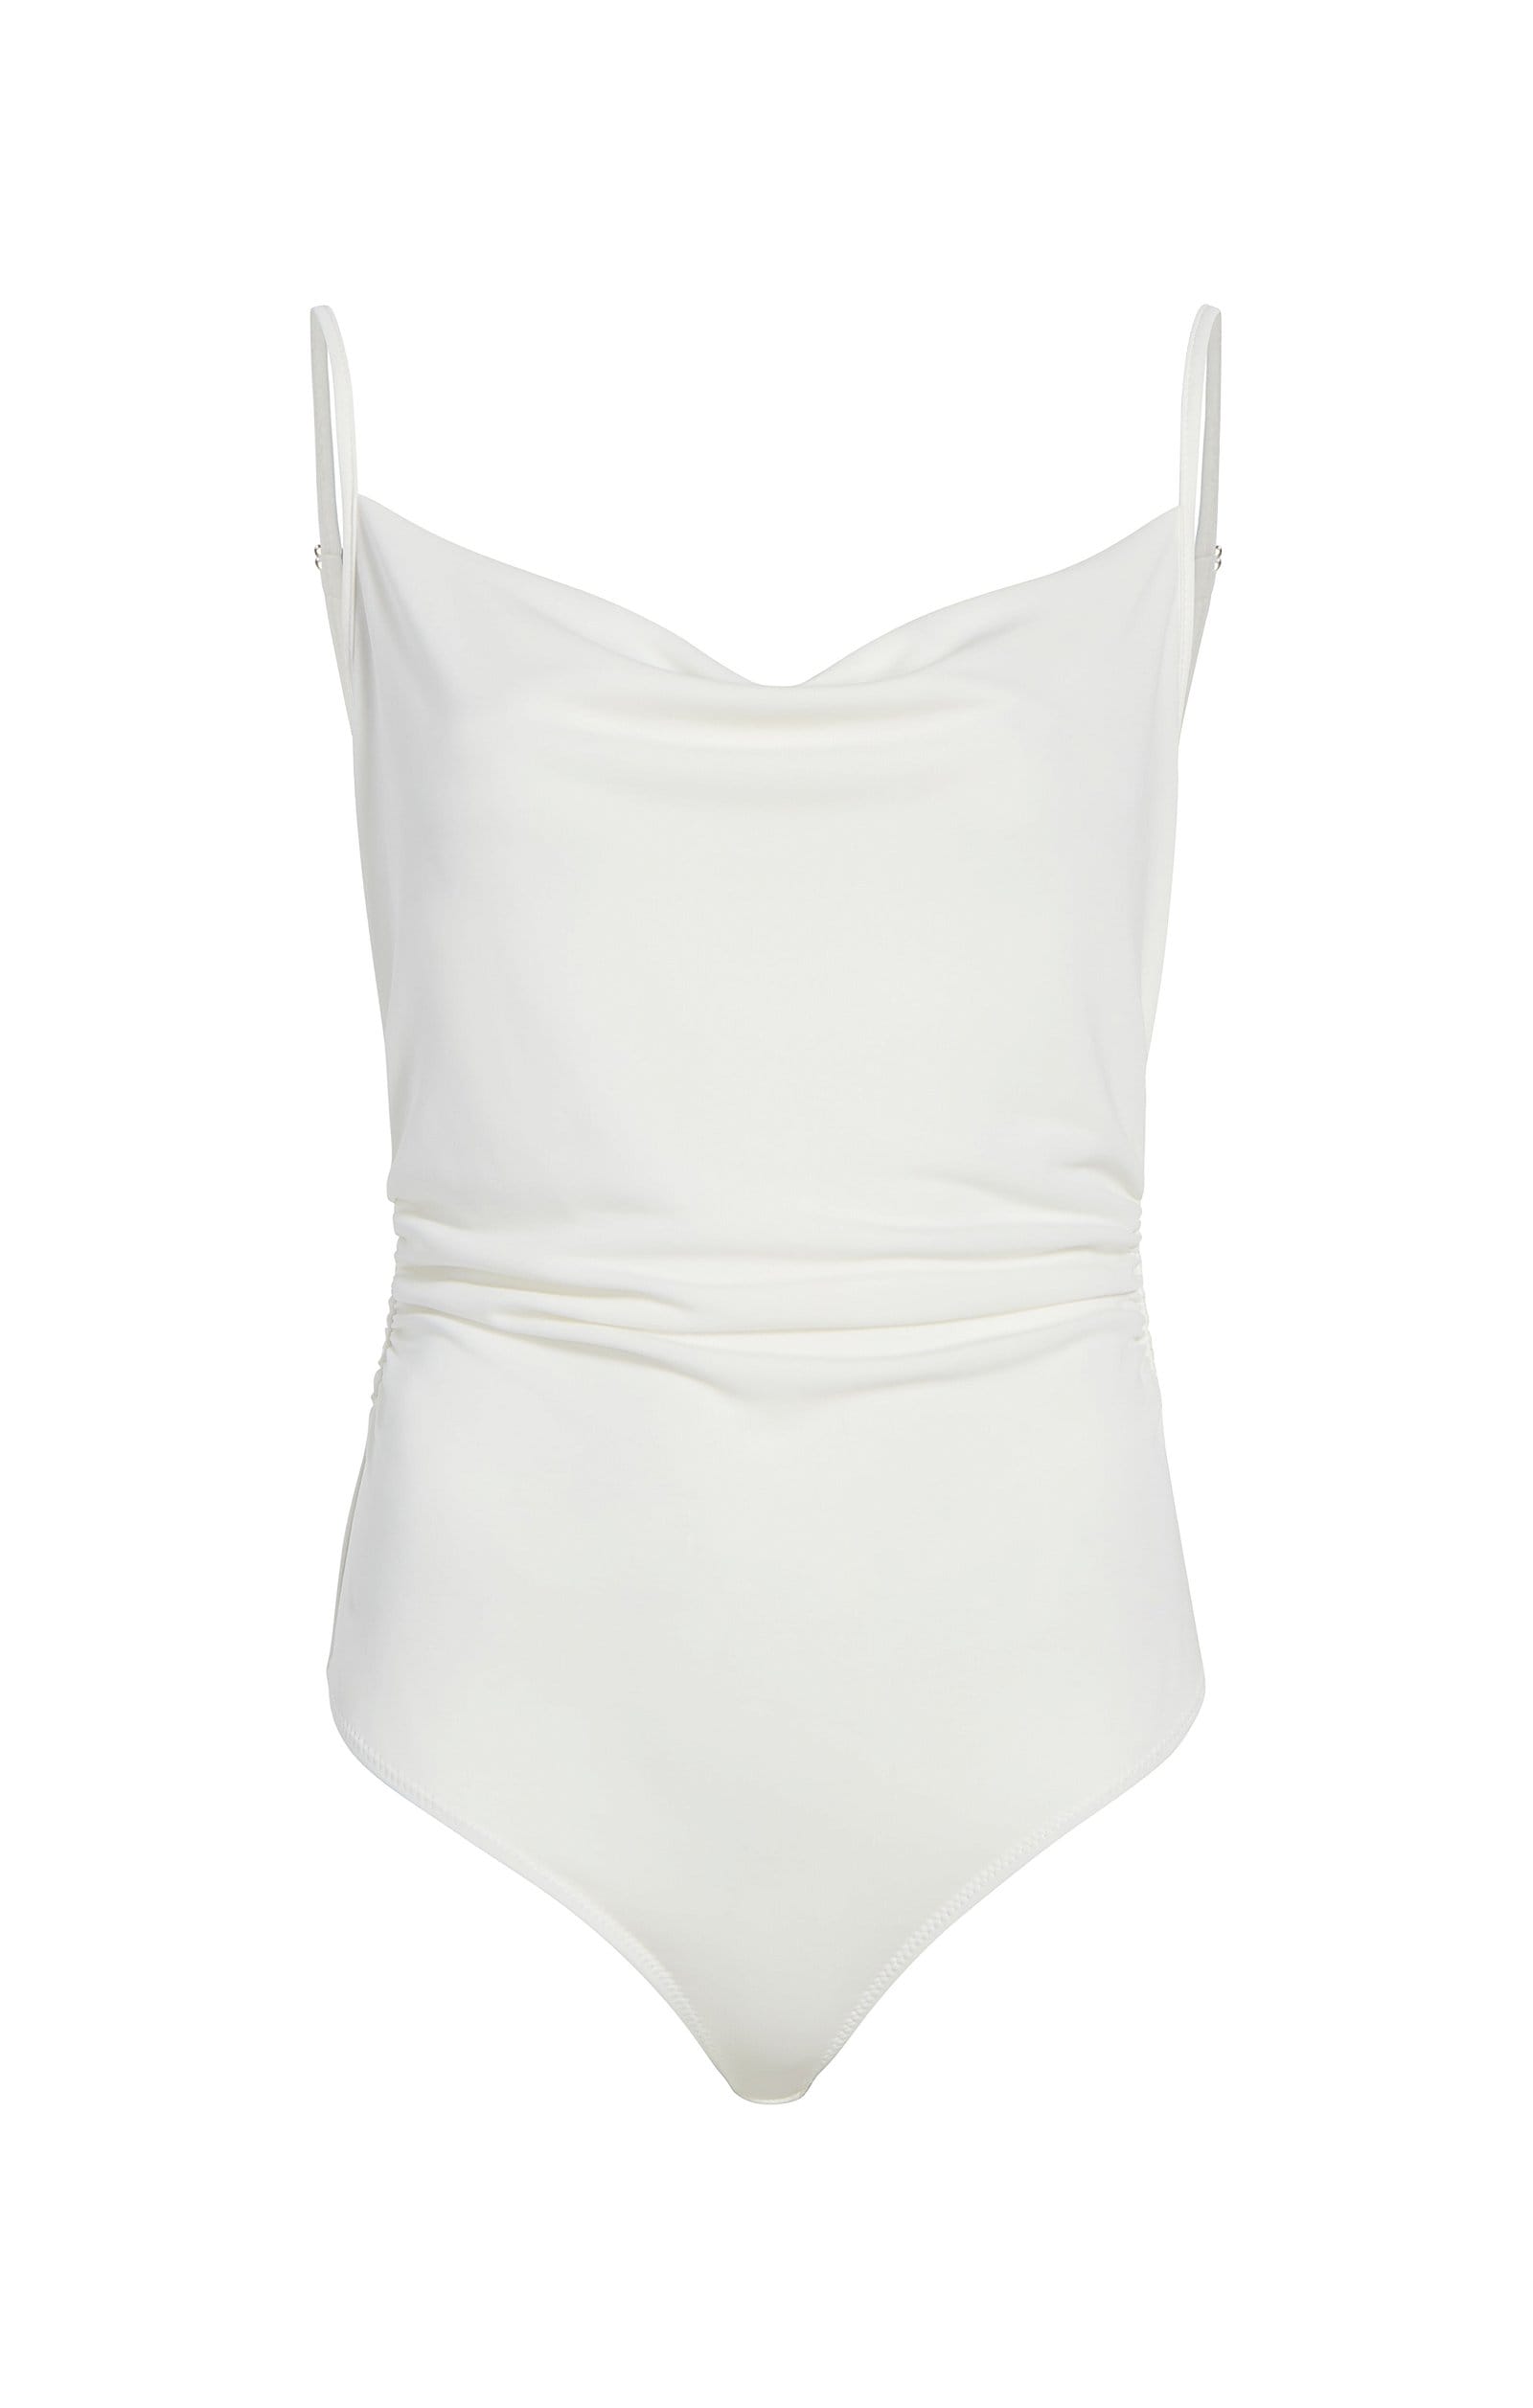 https://cinqasept.nyc/collections/5-a-7-essentials/products/marta-bodysuit-in-ivory